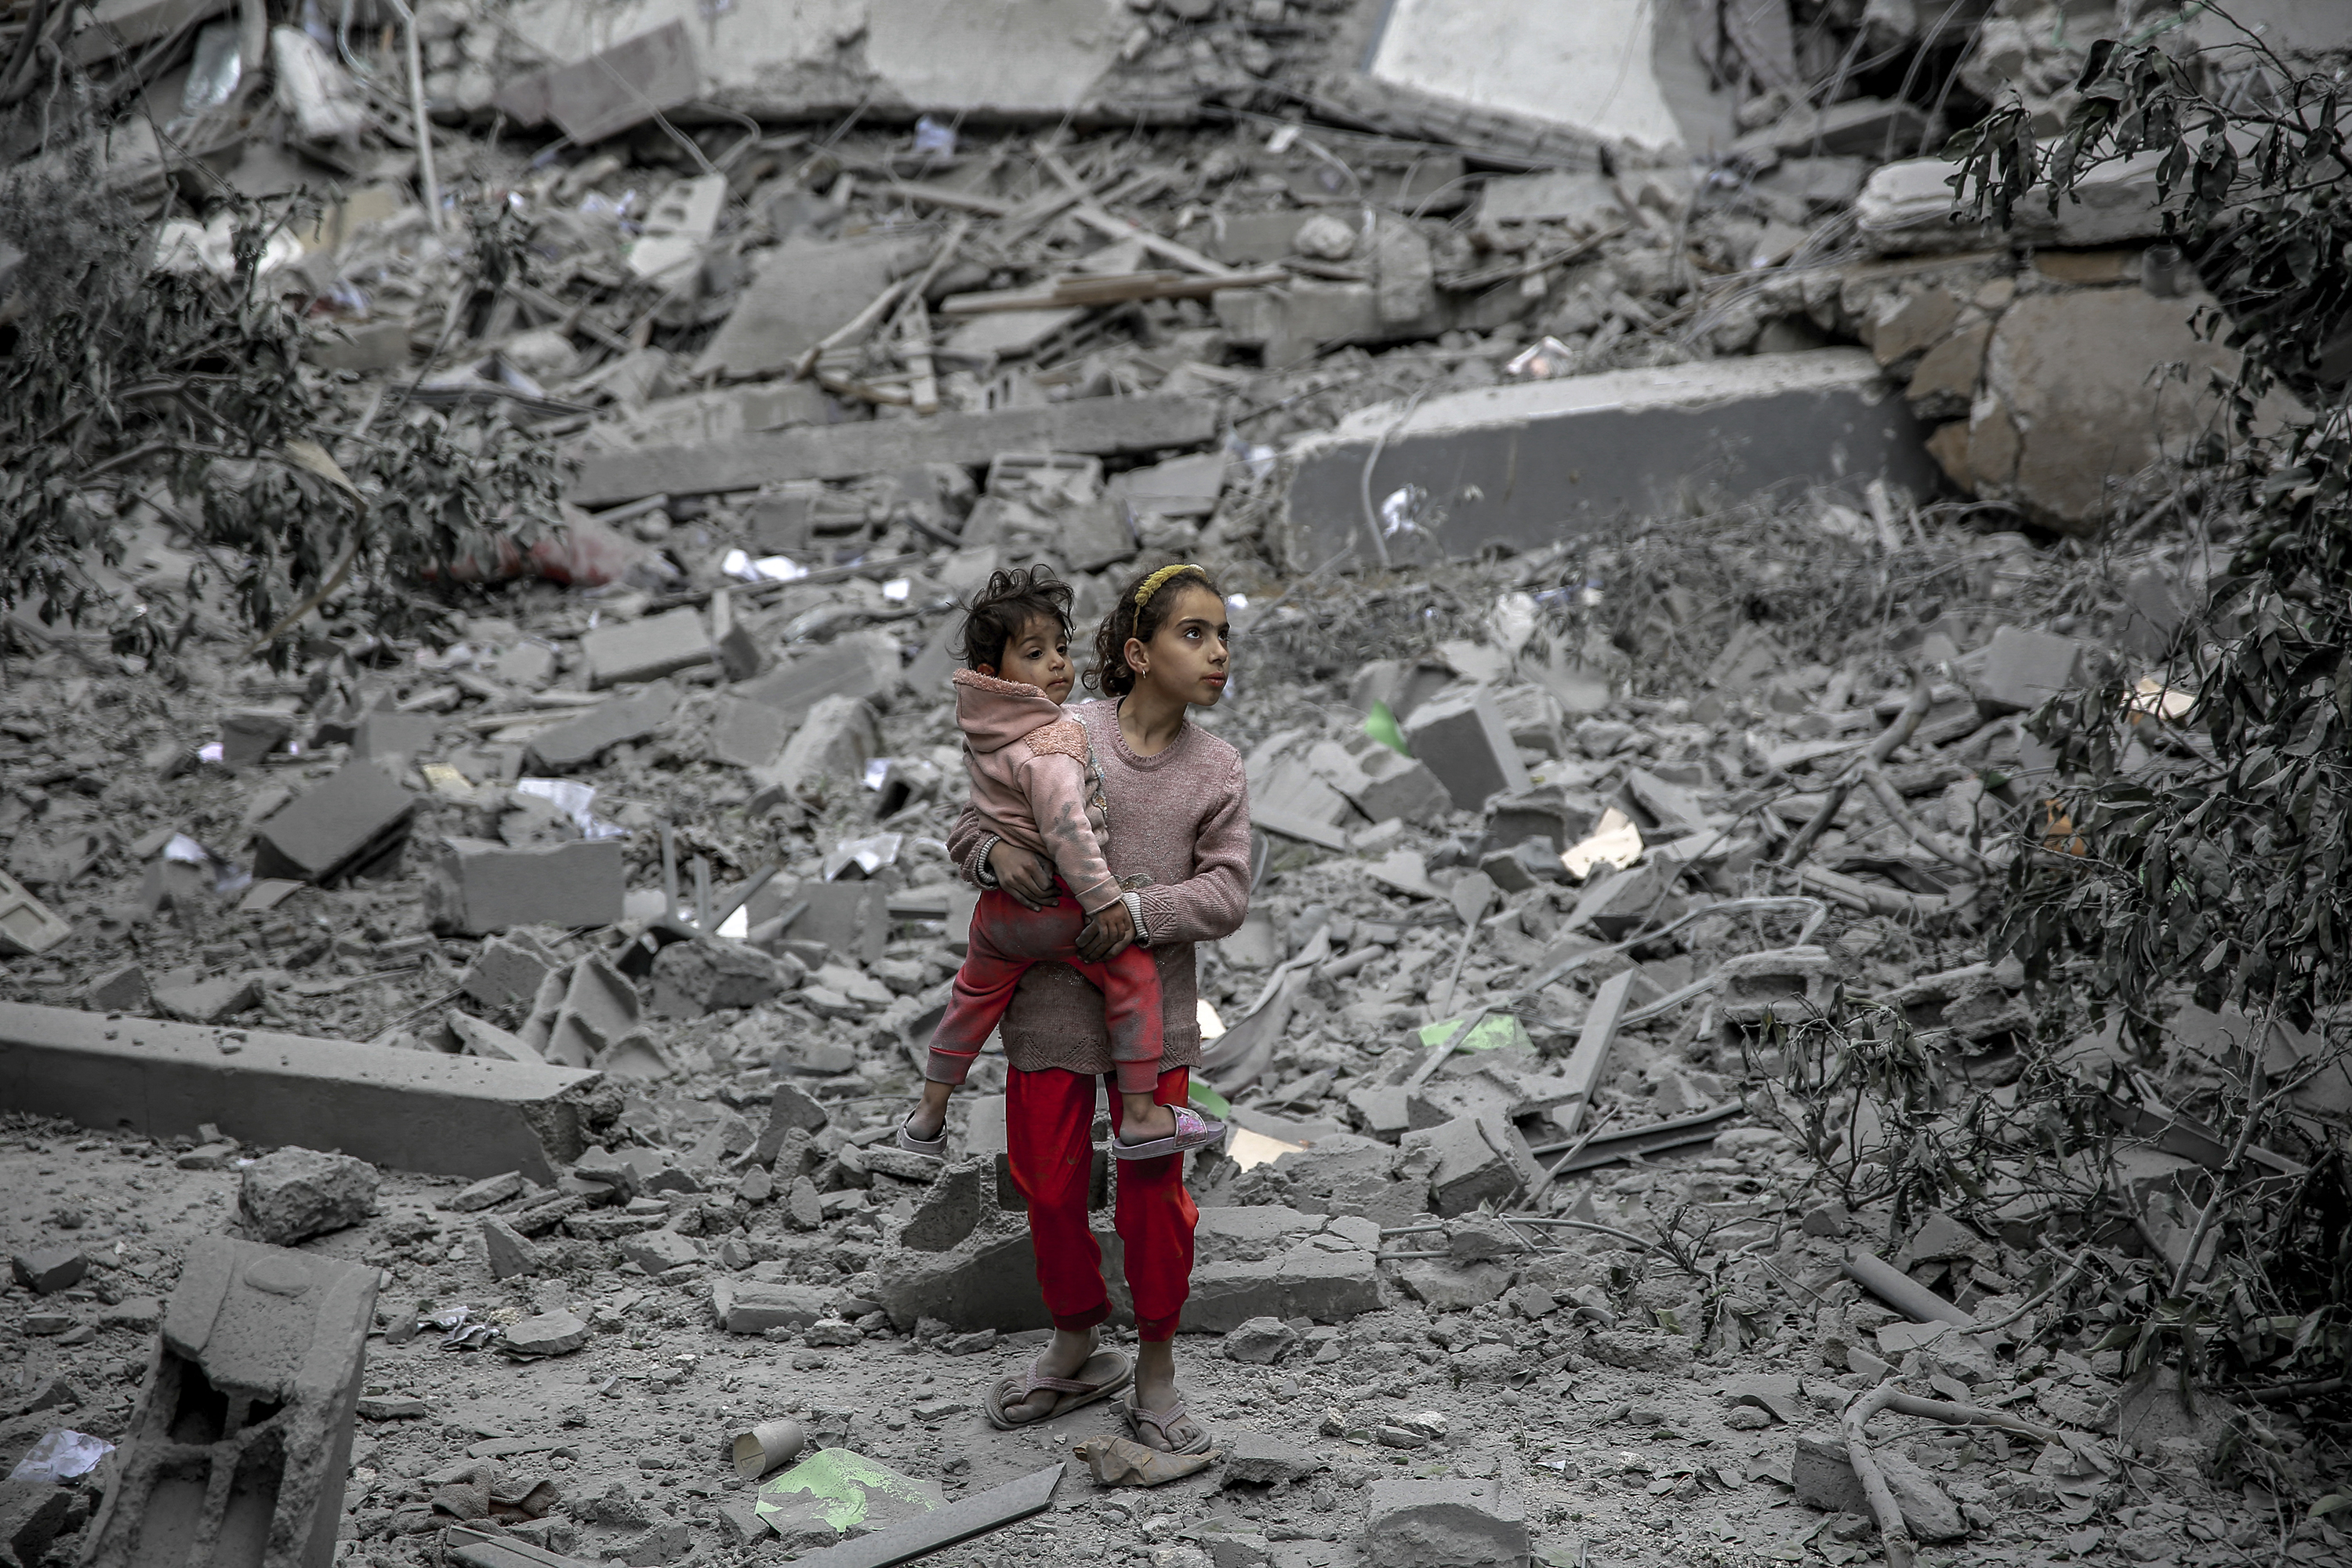 A Palestinian girl carries a child through the rubble of houses destroyed by Israeli bombardment in Gaza City on March 3.